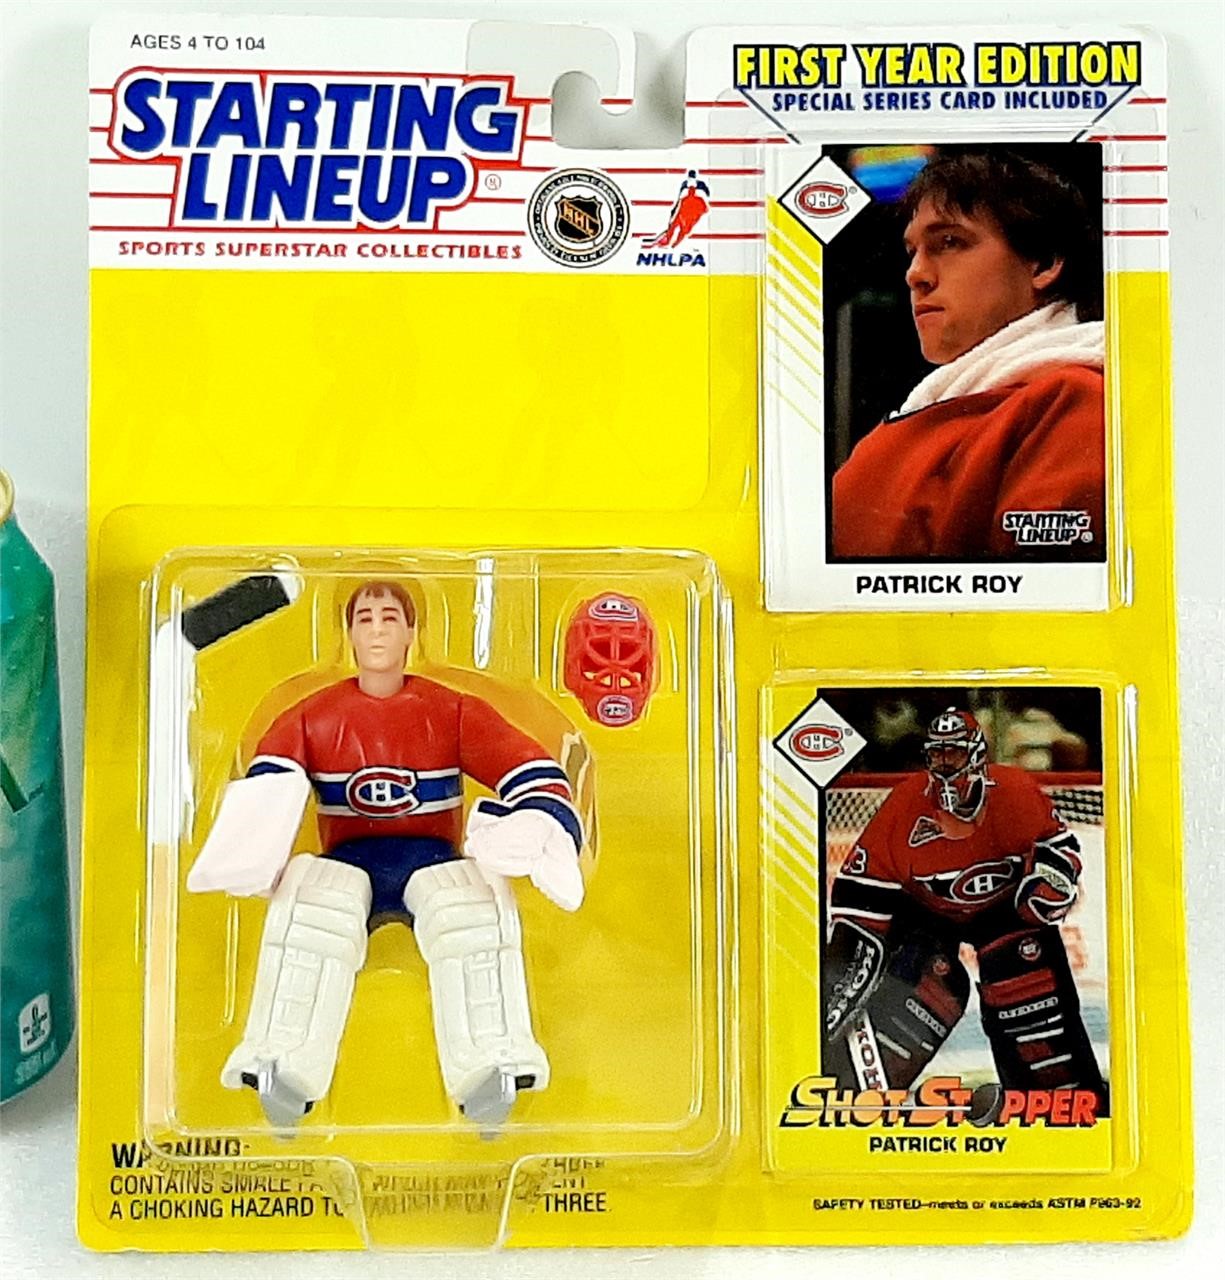 PATRICK ROY 1993 Starting Lineup 1st year edition